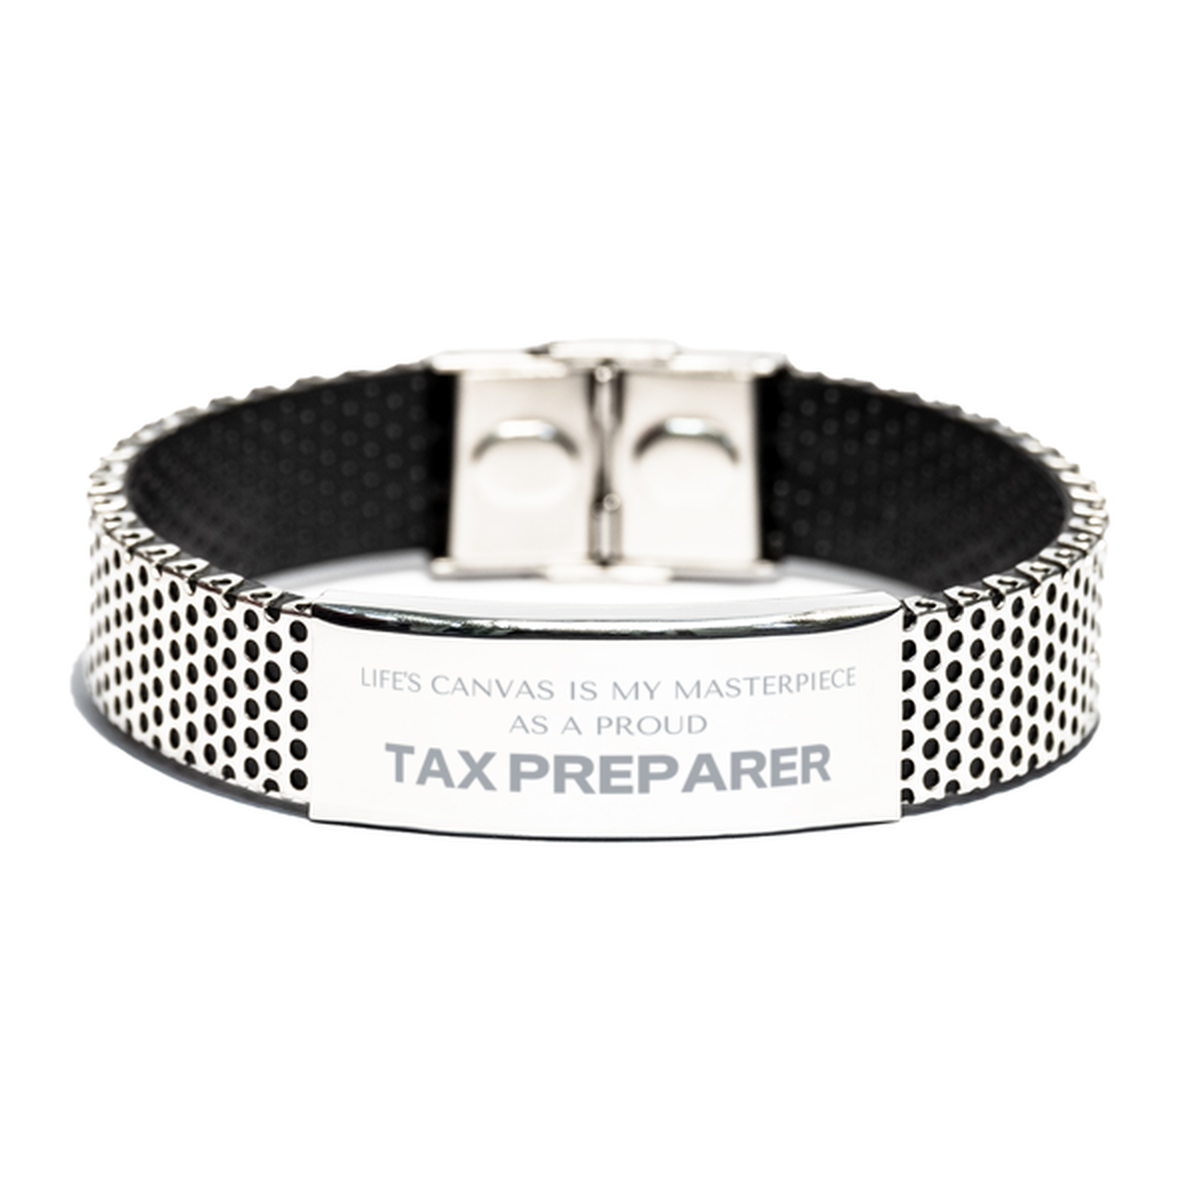 Proud Tax Preparer Gifts, Life's canvas is my masterpiece, Epic Birthday Christmas Unique Stainless Steel Bracelet For Tax Preparer, Coworkers, Men, Women, Friends